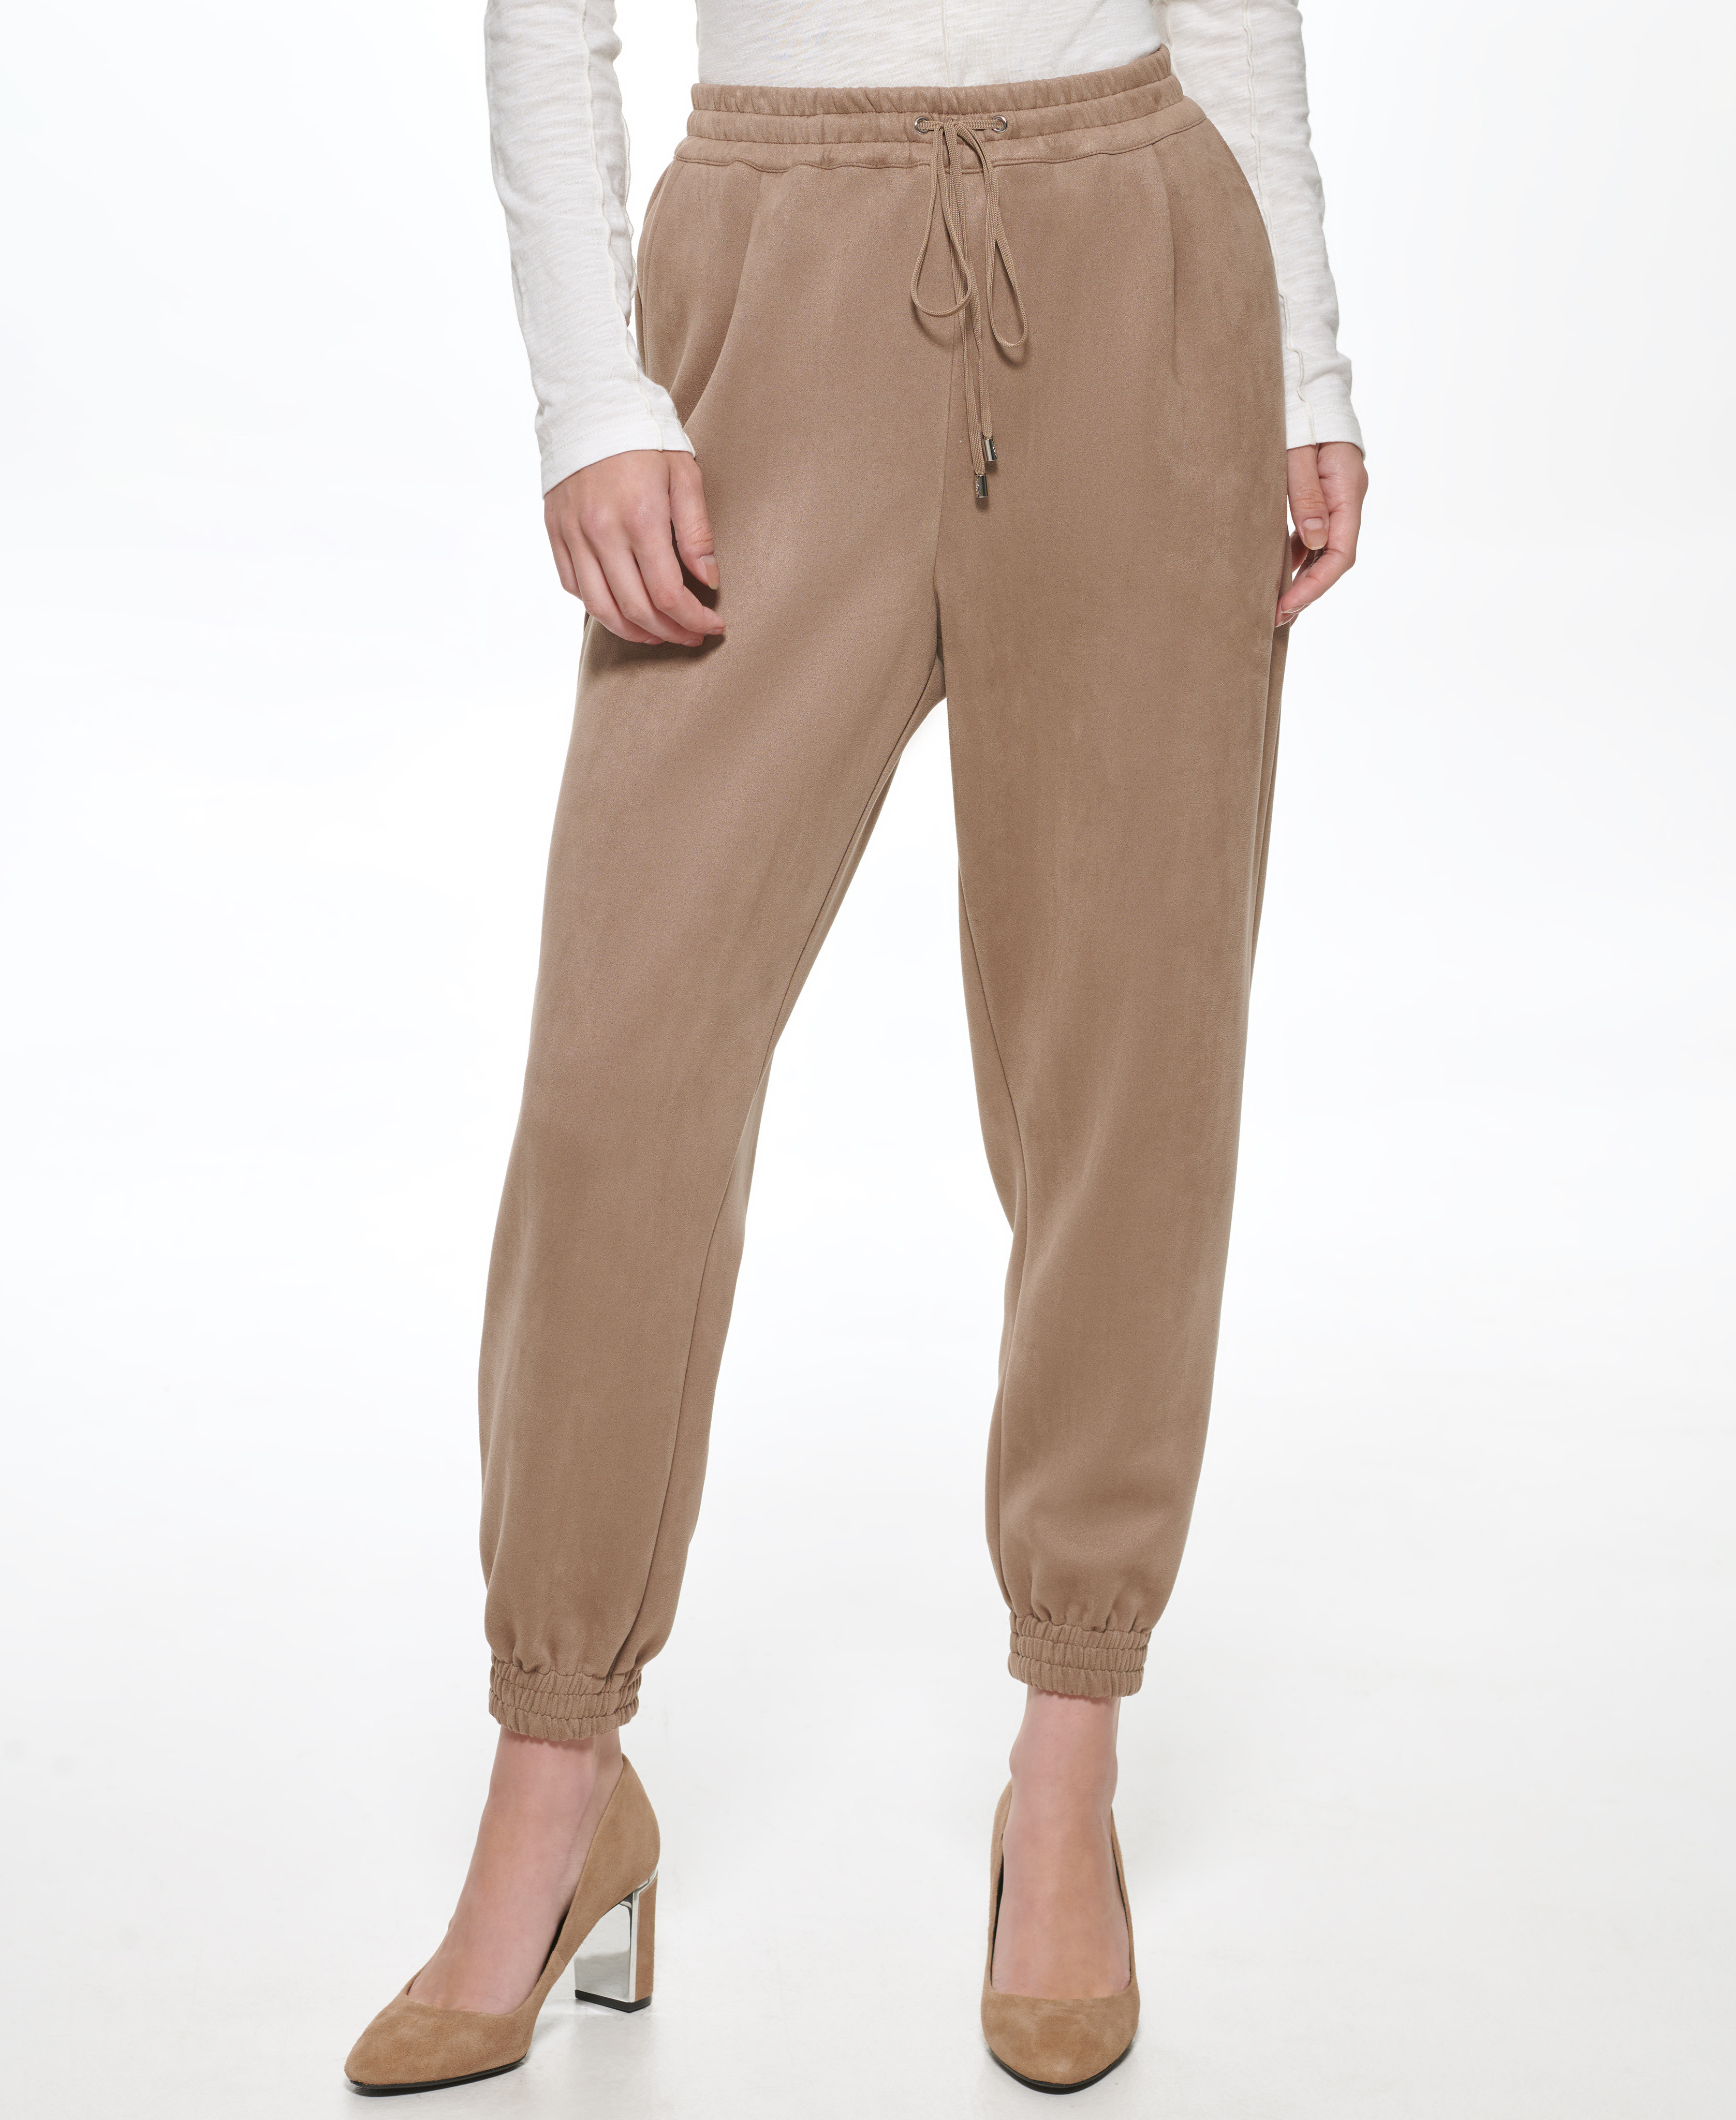 Pantalone jogger in camoscio, Marrone, large image number 3